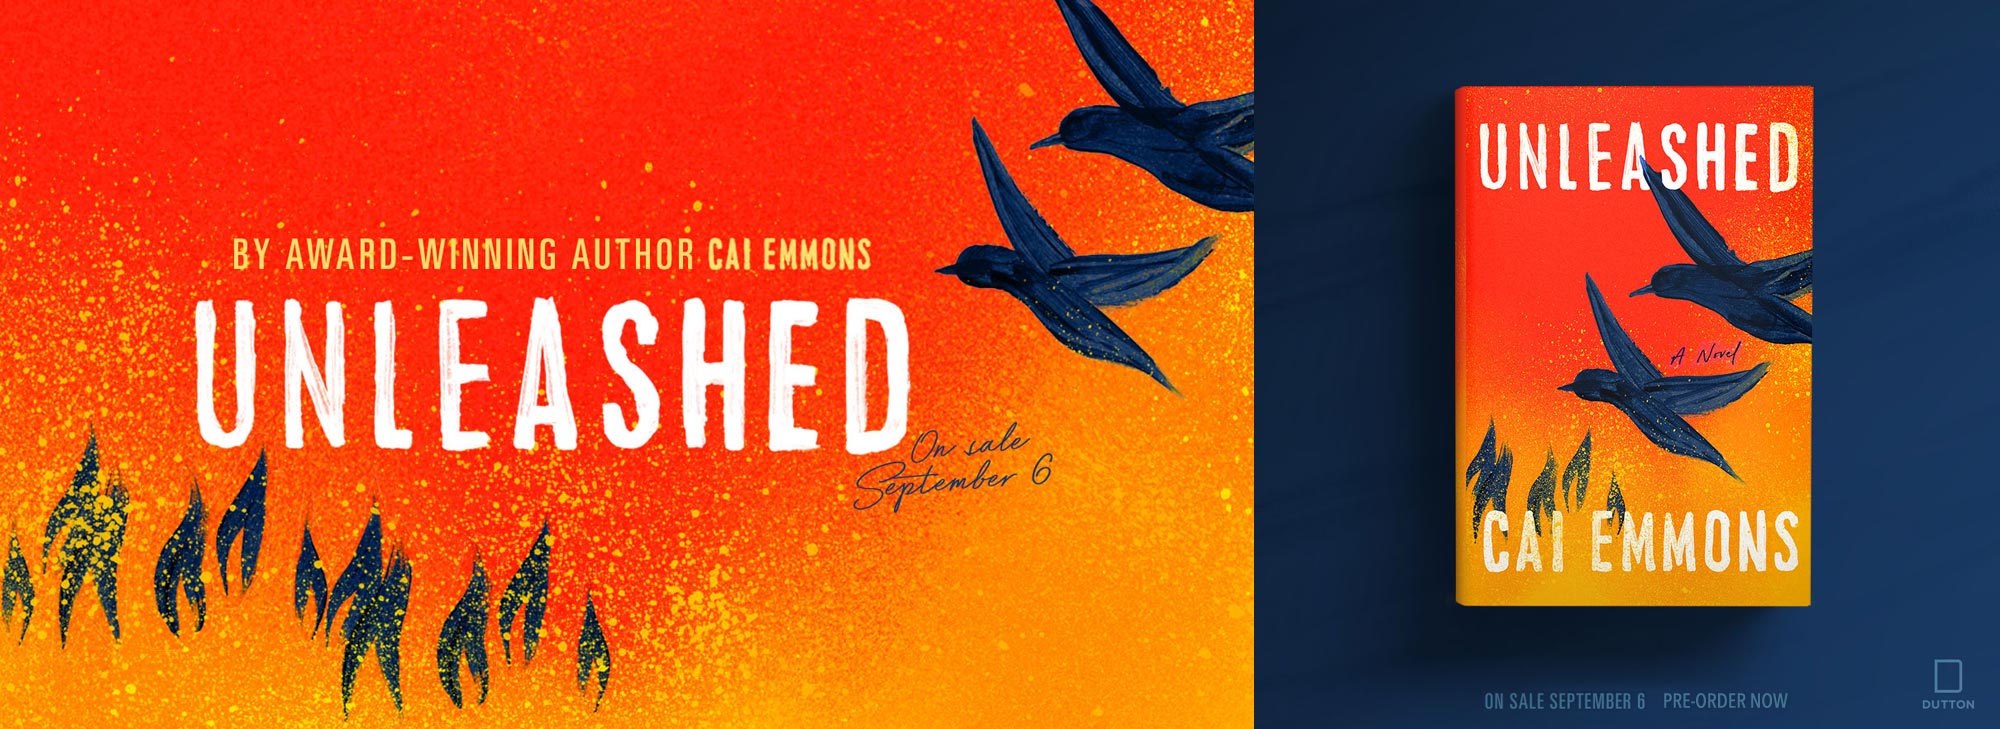 UNLEASHED, a novel by author Cai Emmons